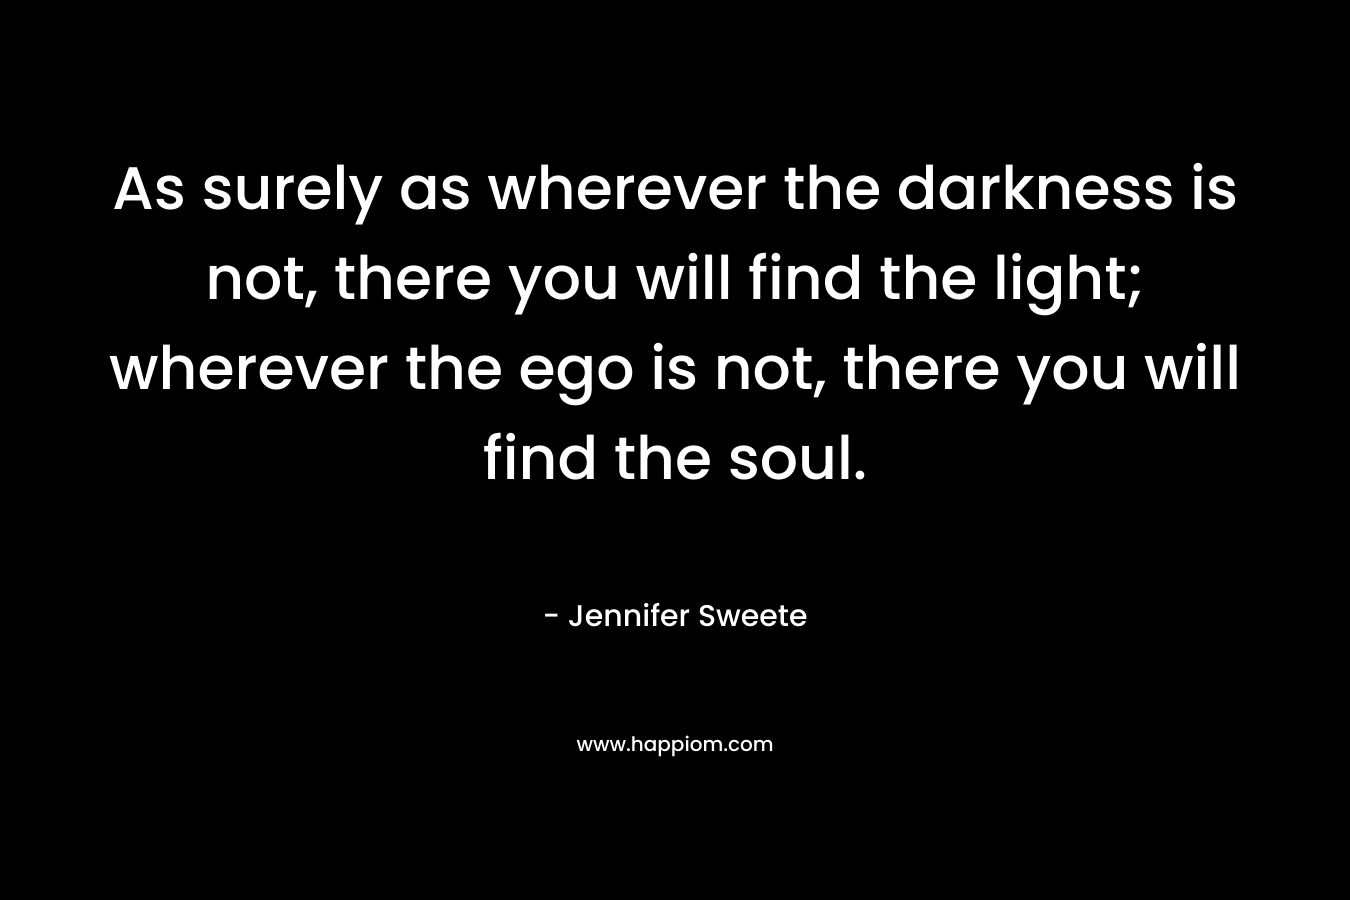 As surely as wherever the darkness is not, there you will find the light; wherever the ego is not, there you will find the soul.